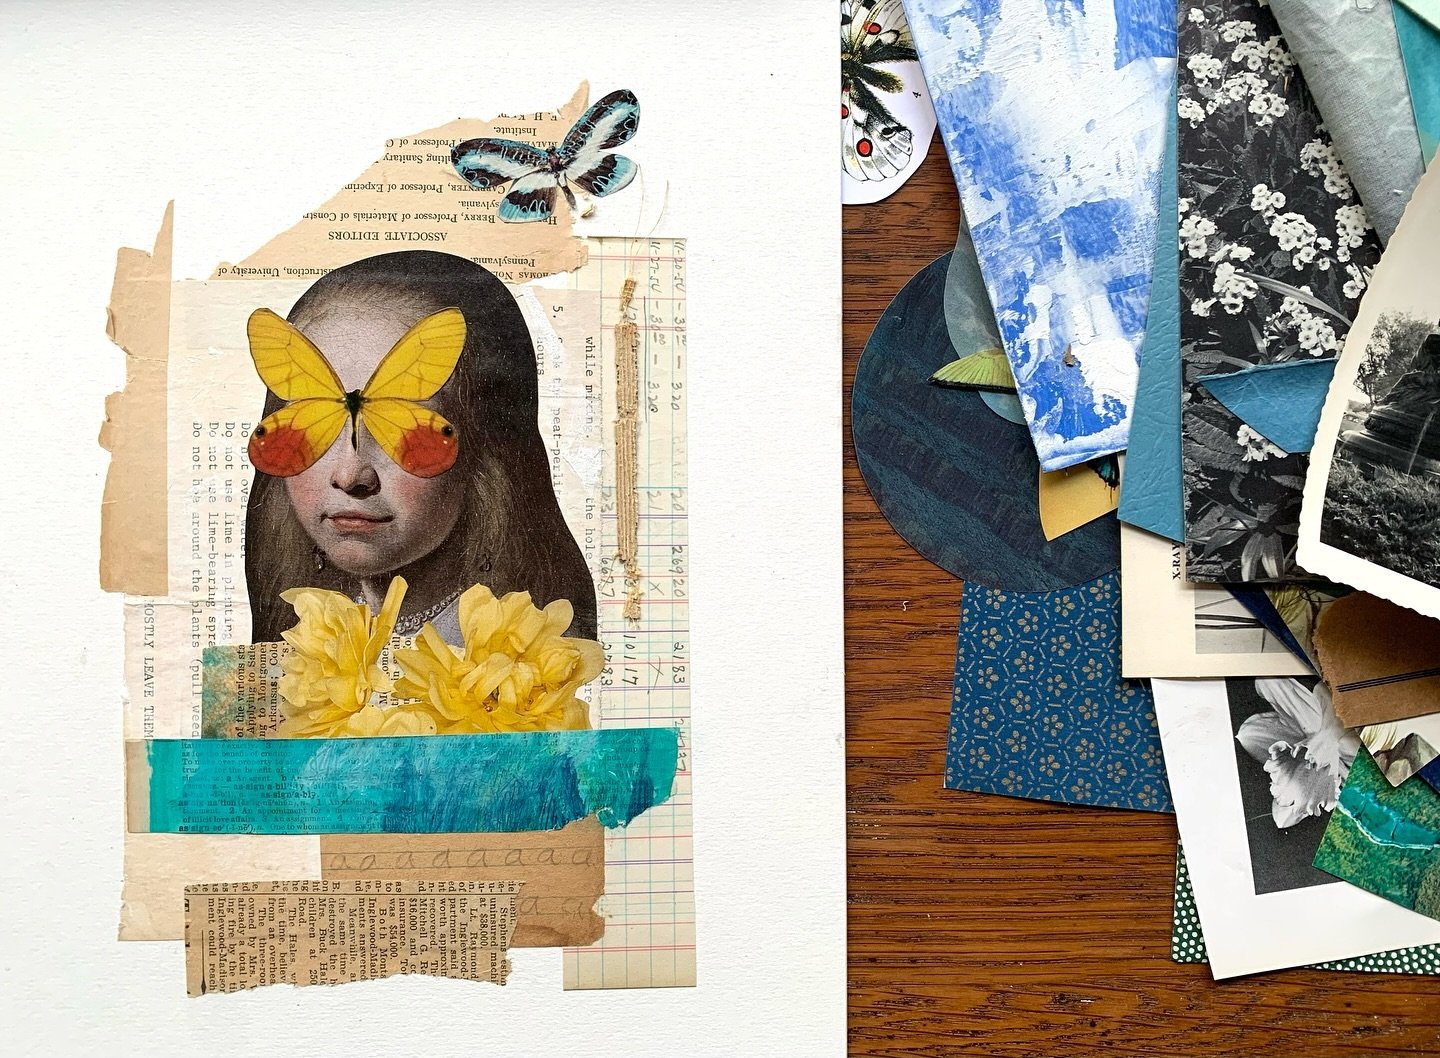 A last minute collage today.

#collage #collageart #collageartist
#collageartwork #moderncollage #contemporarycollage 
#papercollage #analogcollage #collageonpaper #handcutcollage #handmadecollage #paperart #mixedmediaartist #cutandpaste #dailycollag